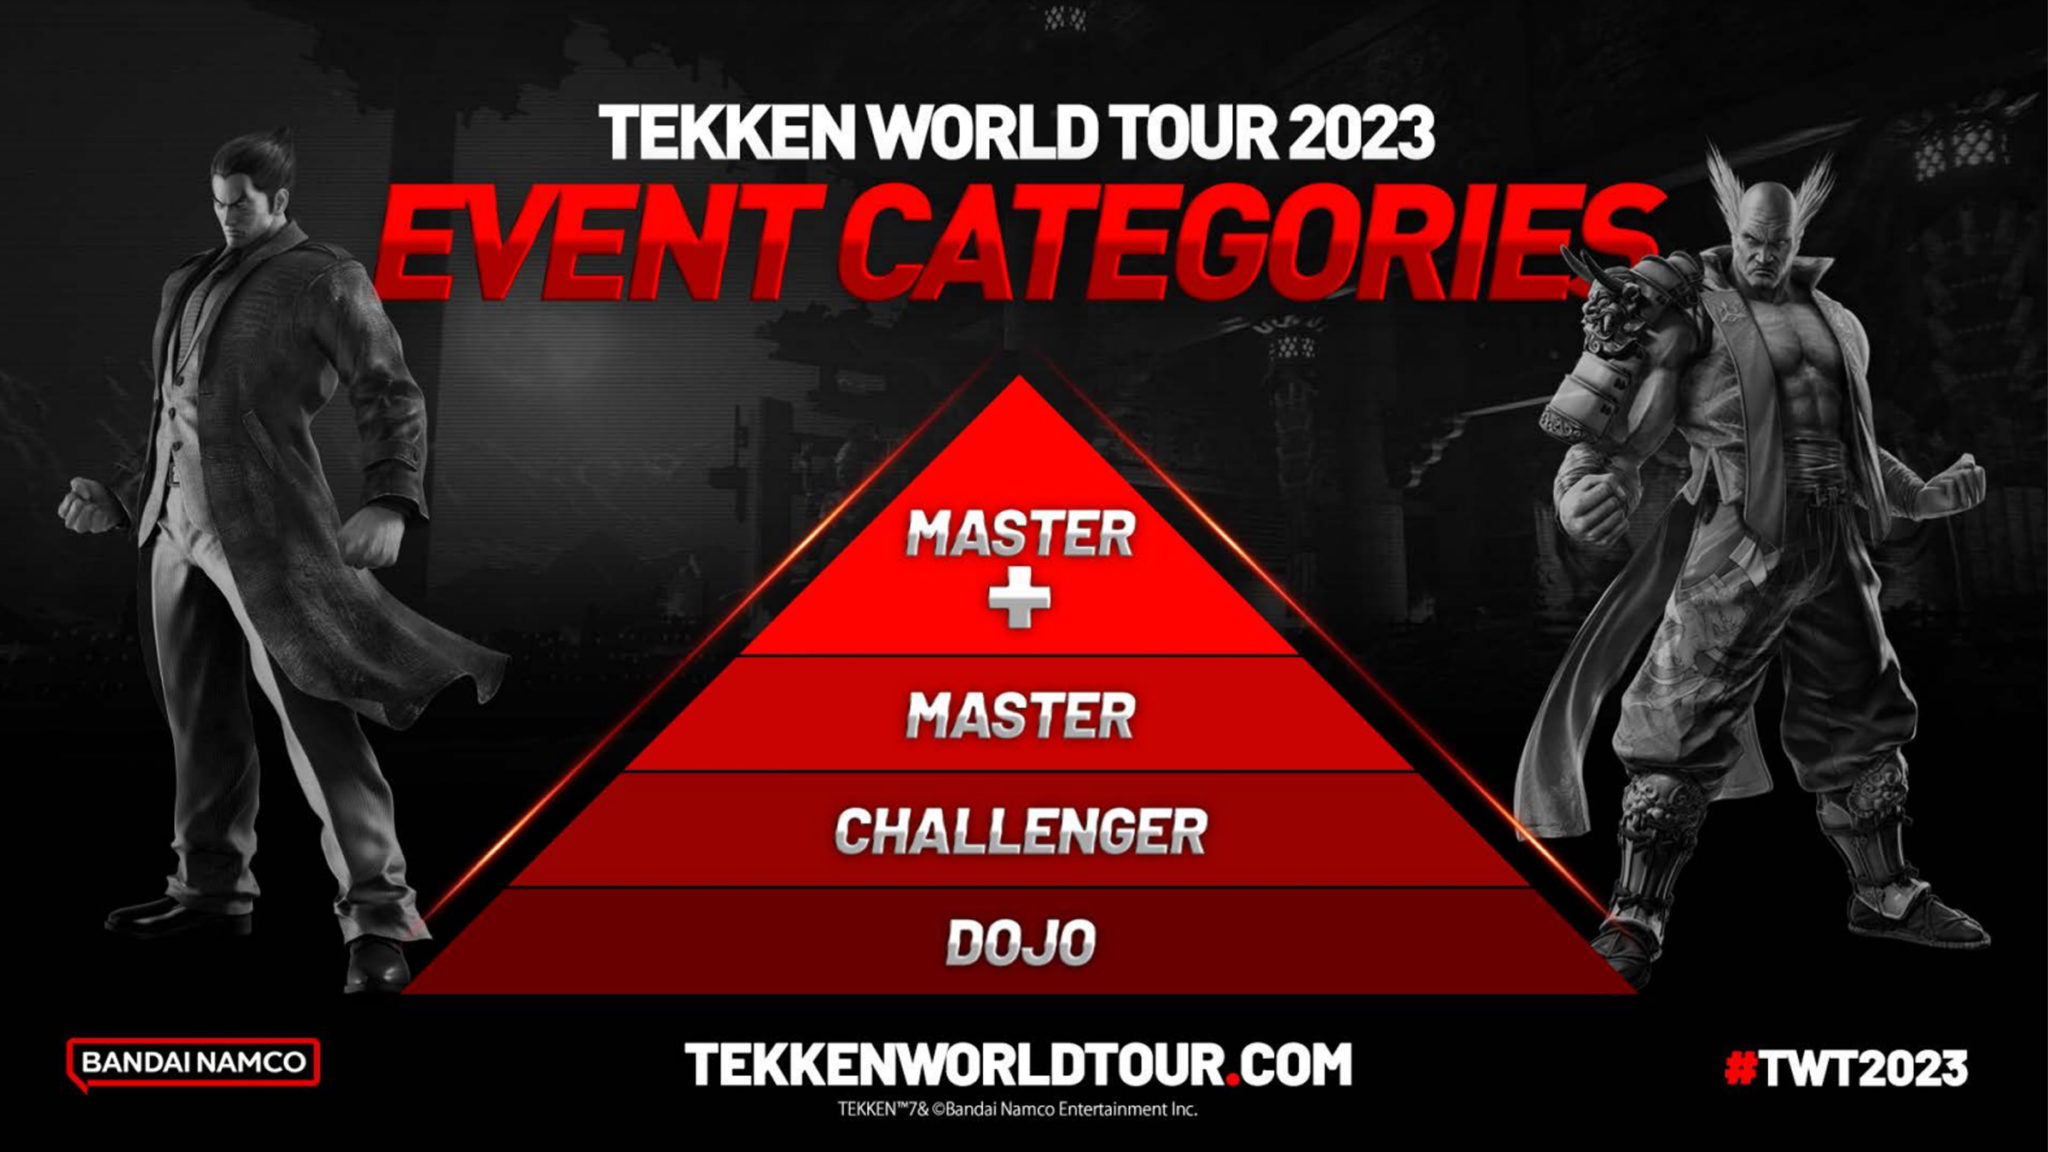 TEKKEN WORLD TOUR 2023 RETURNS WITH ALL INPERSON EVENTS STARTING MARCH